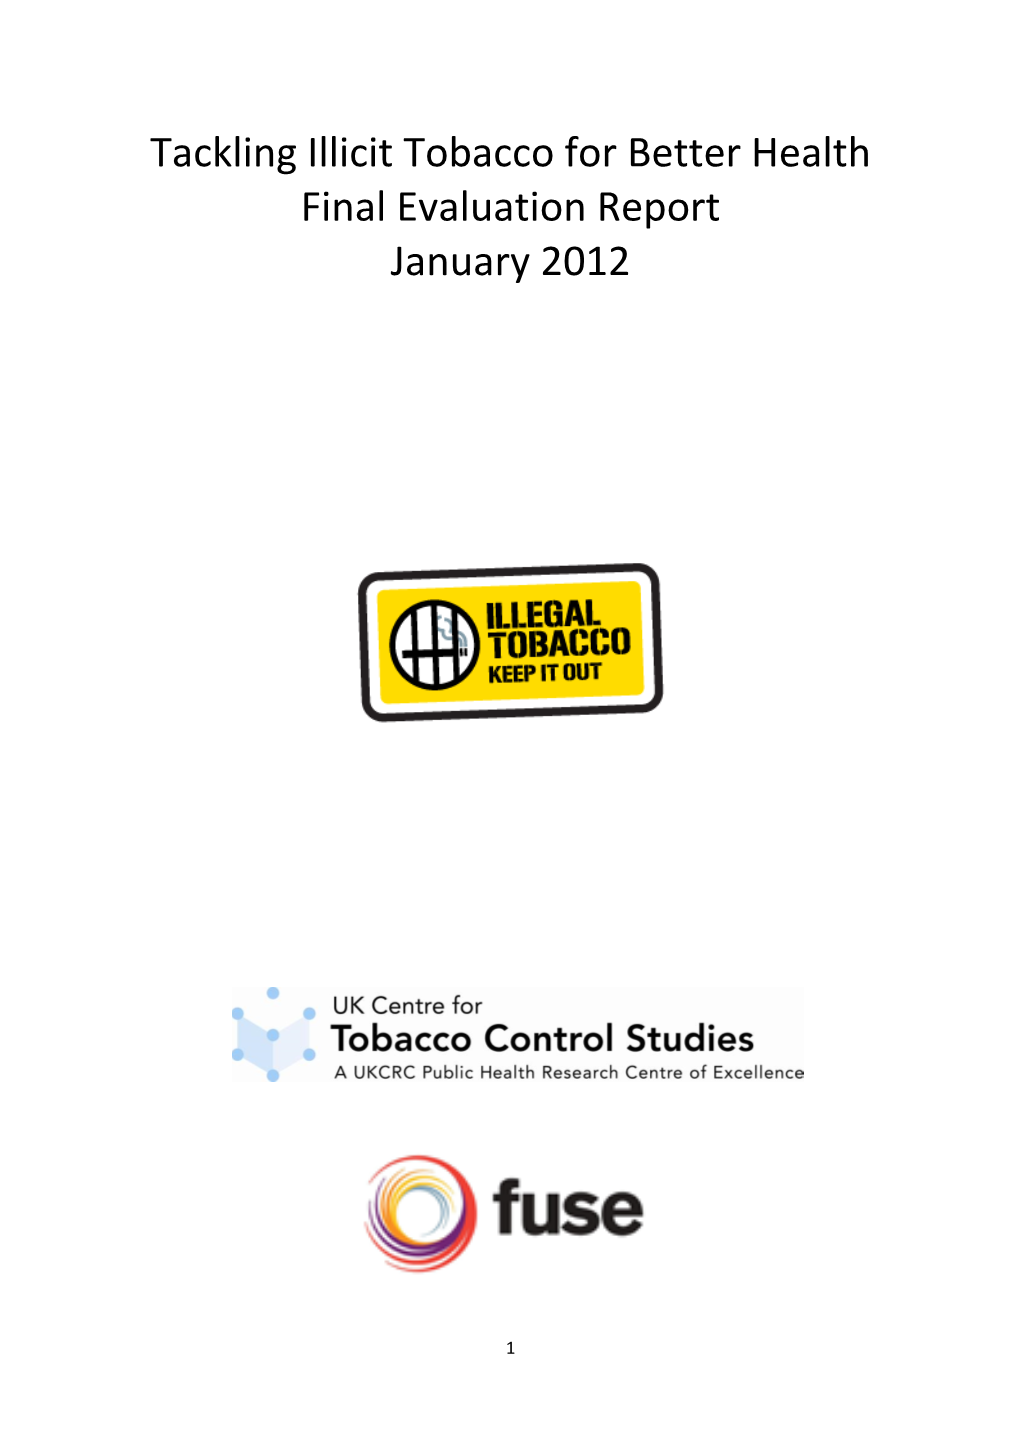 Tackling Illicit Tobacco for Better Health Final Evaluation Report January 2012